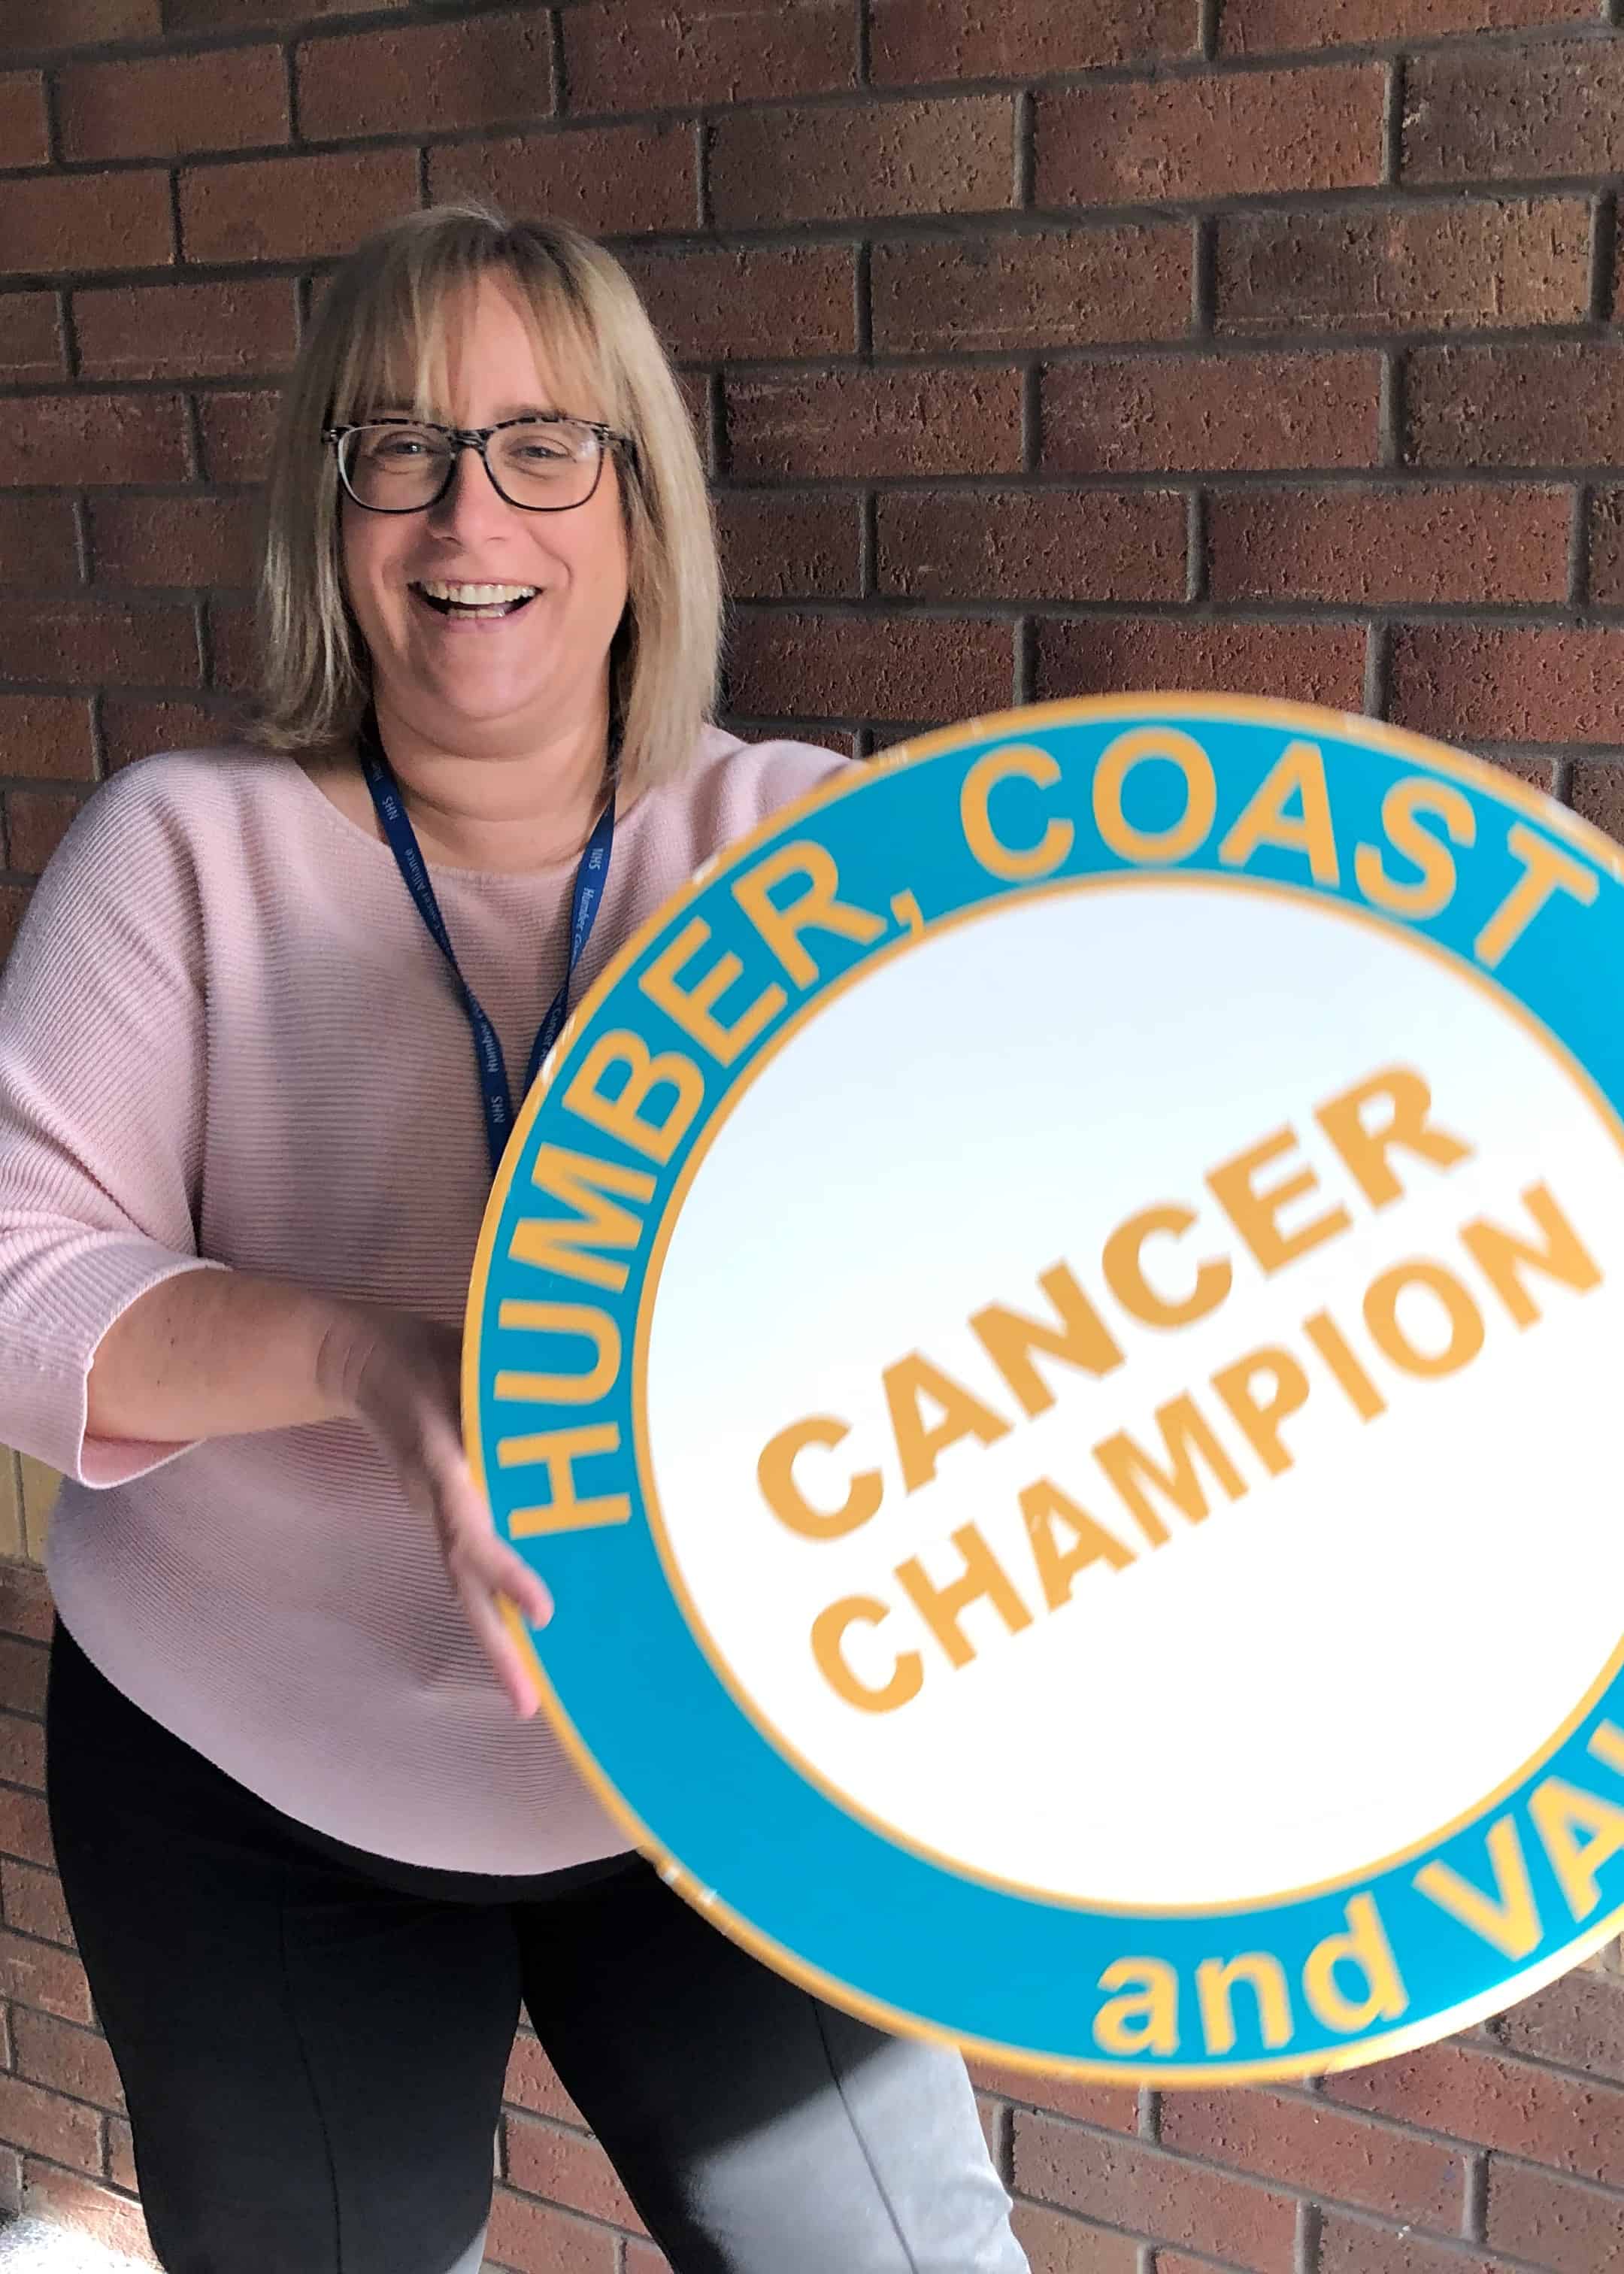 Photo of Emma Lewin, volunteer co-ordinator is stood in front of a brick wall holdig a photo prop of the Cancer Champions logo. Emma is looking at the camera and smiling. She has blonde shoulder length hair, a fringe and glasses. She is wearing a pink top and grey trousers.